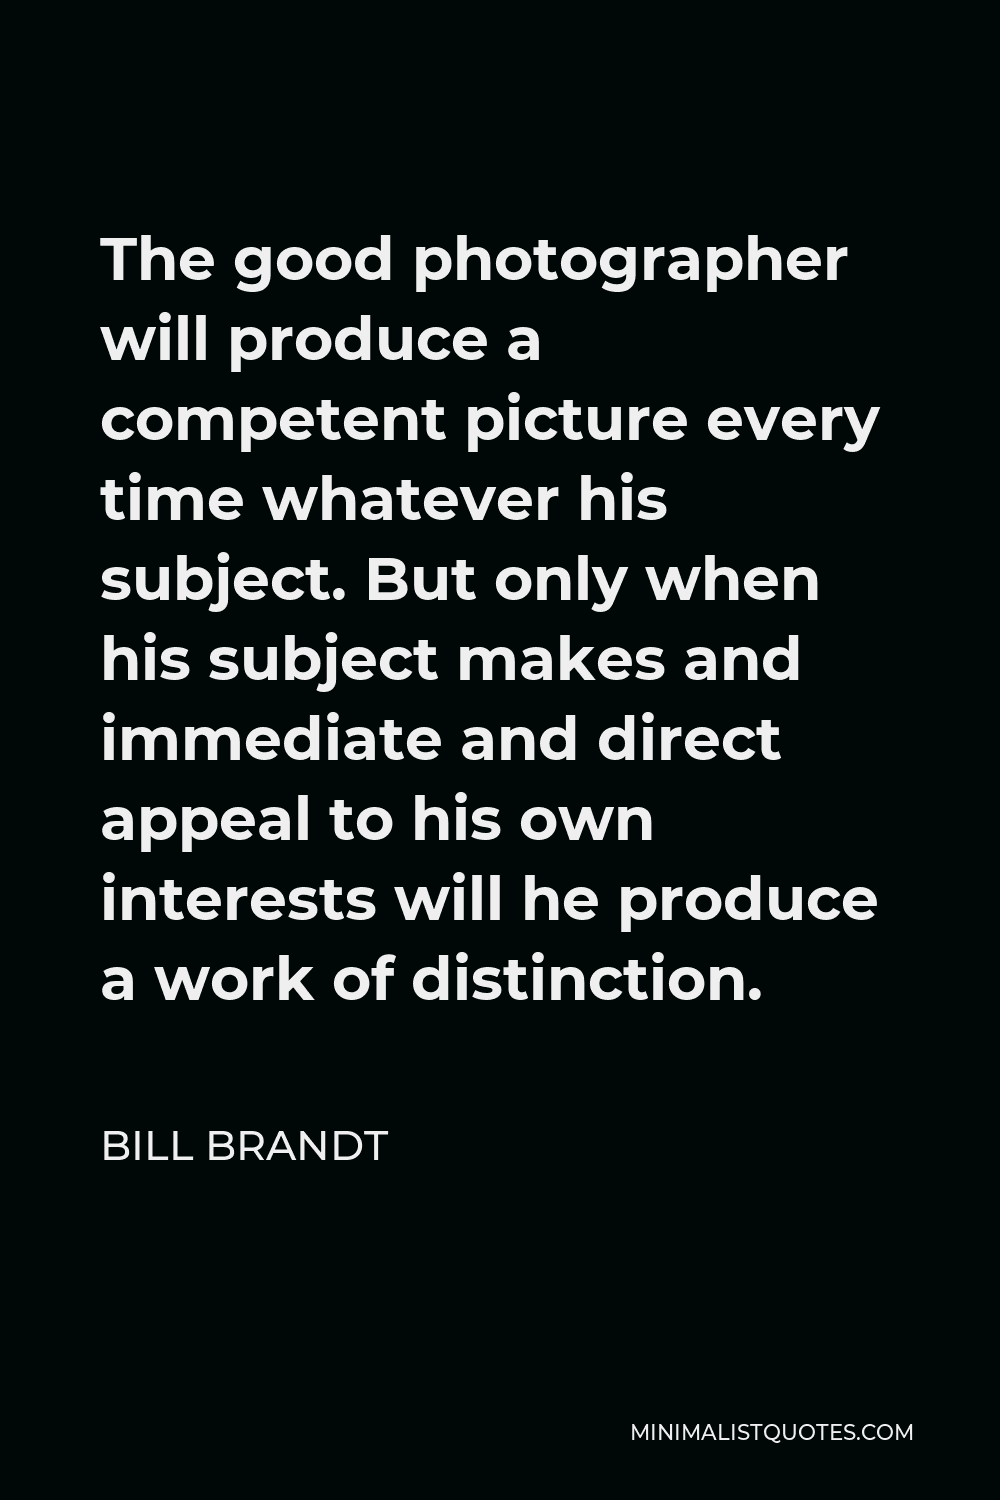 Bill Brandt Quote - The good photographer will produce a competent picture every time whatever his subject. But only when his subject makes and immediate and direct appeal to his own interests will he produce a work of distinction.